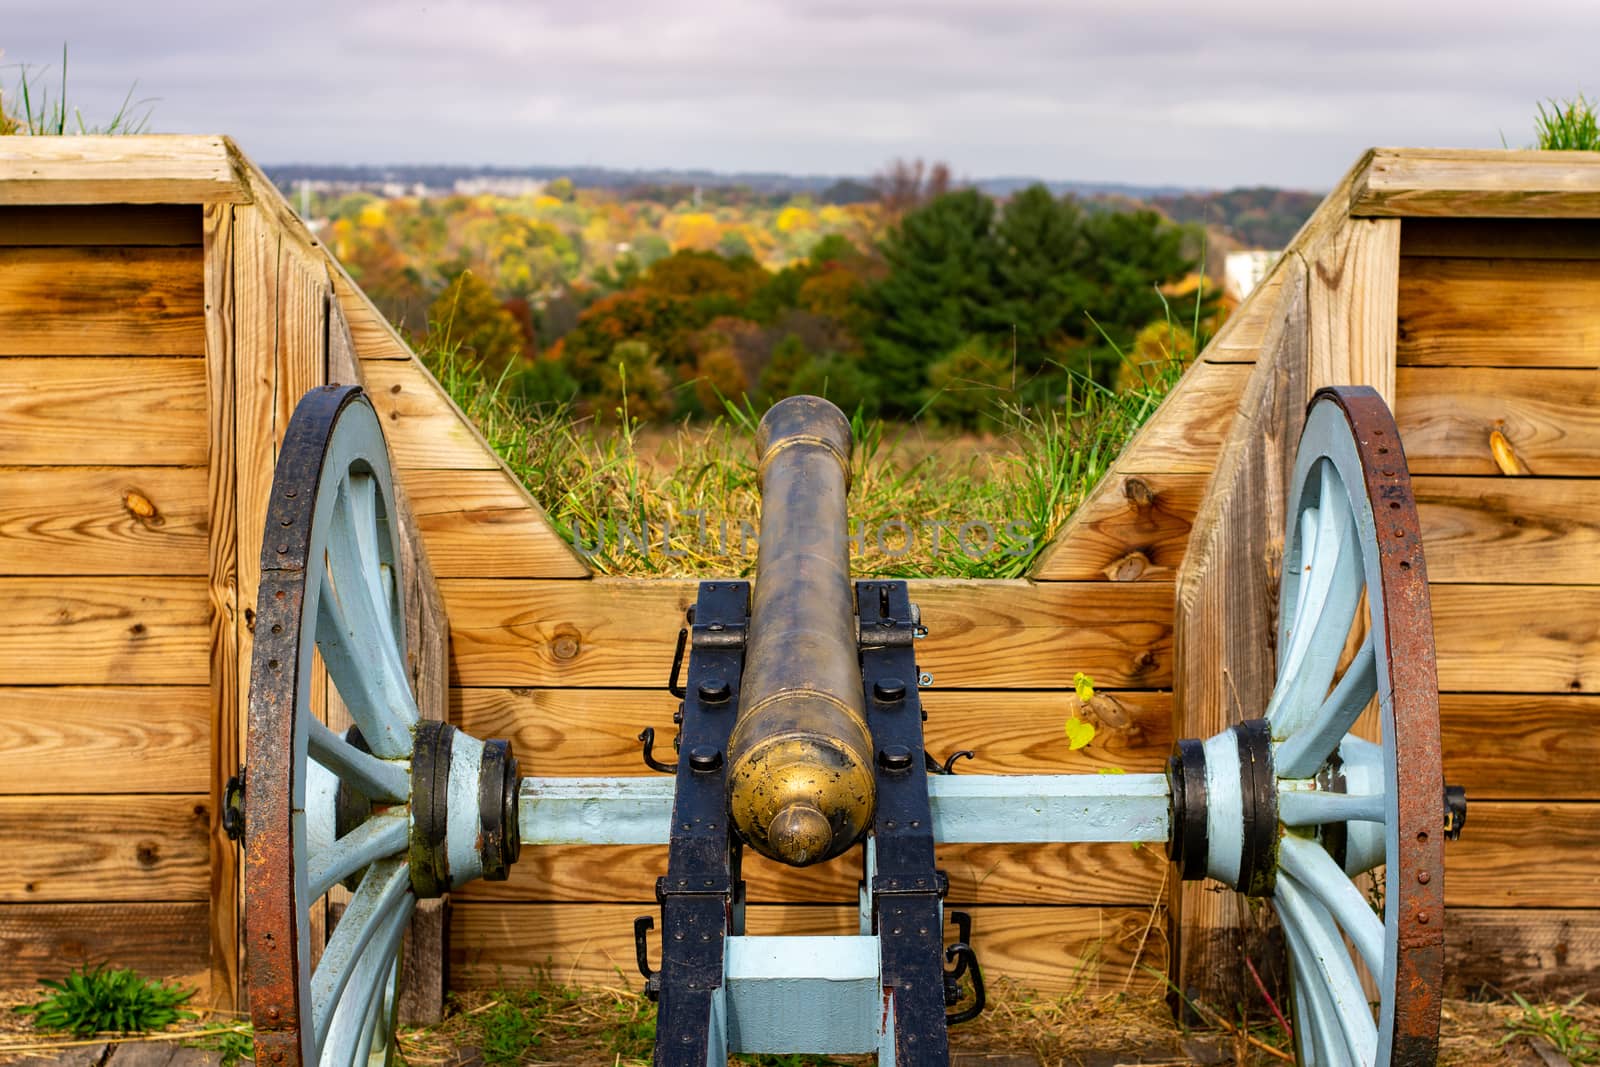 A Revolutionary War Era Cannon at a Redoubt in Valley Forge Nati by bju12290